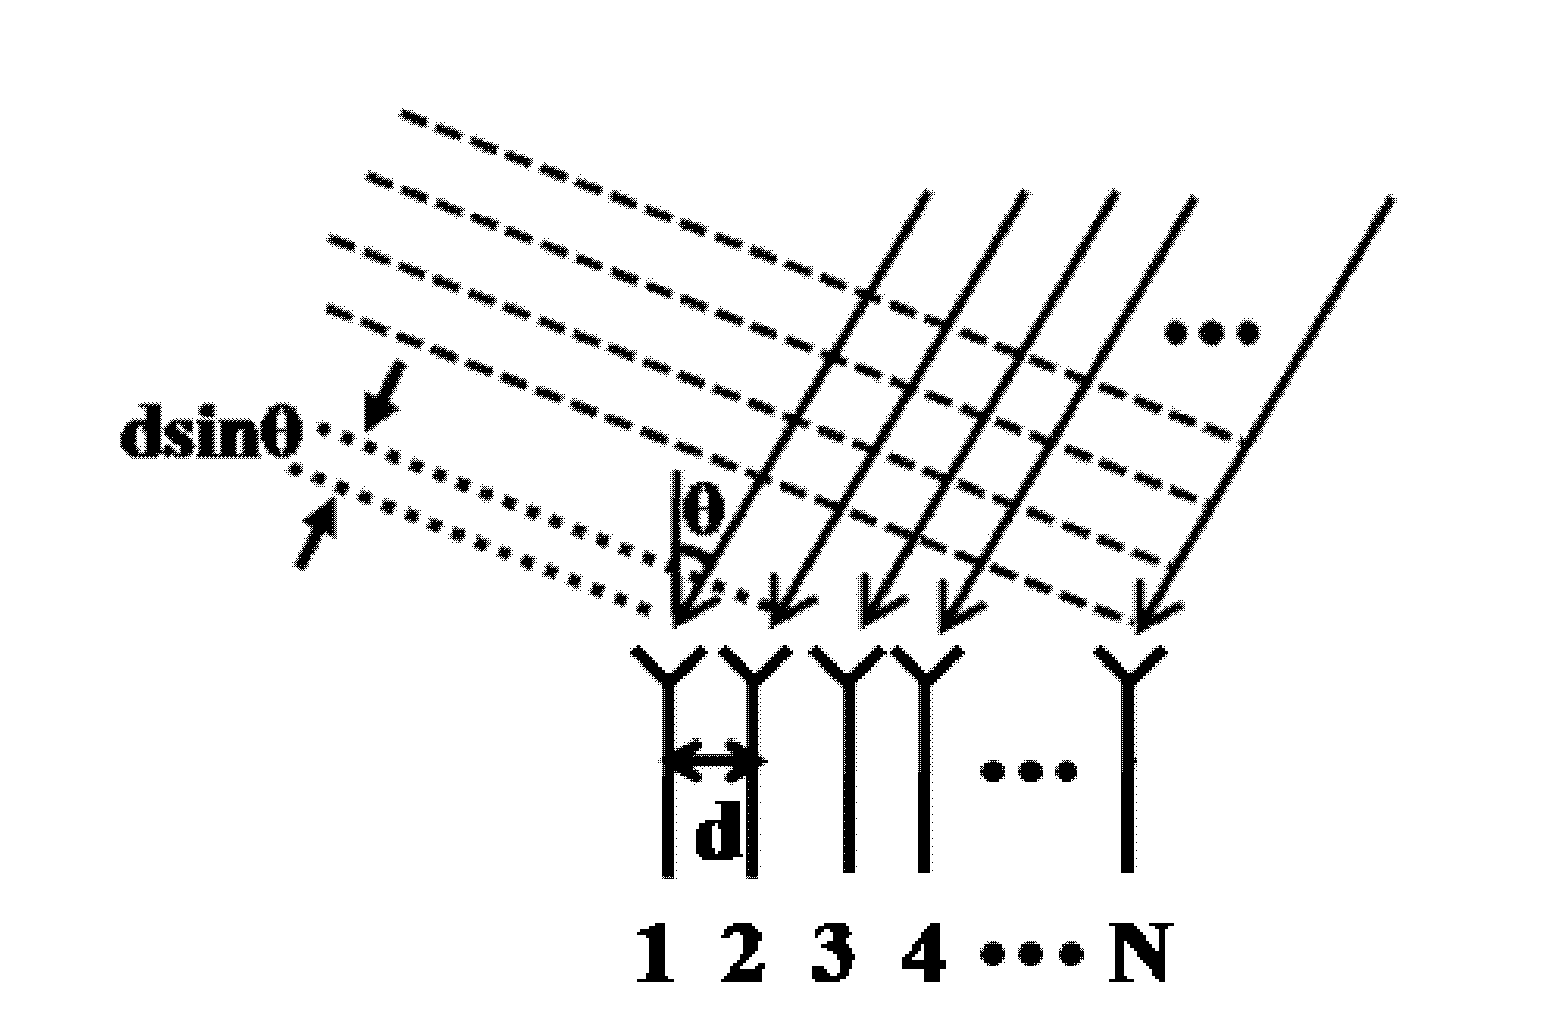 Light control microwave beam receiving system